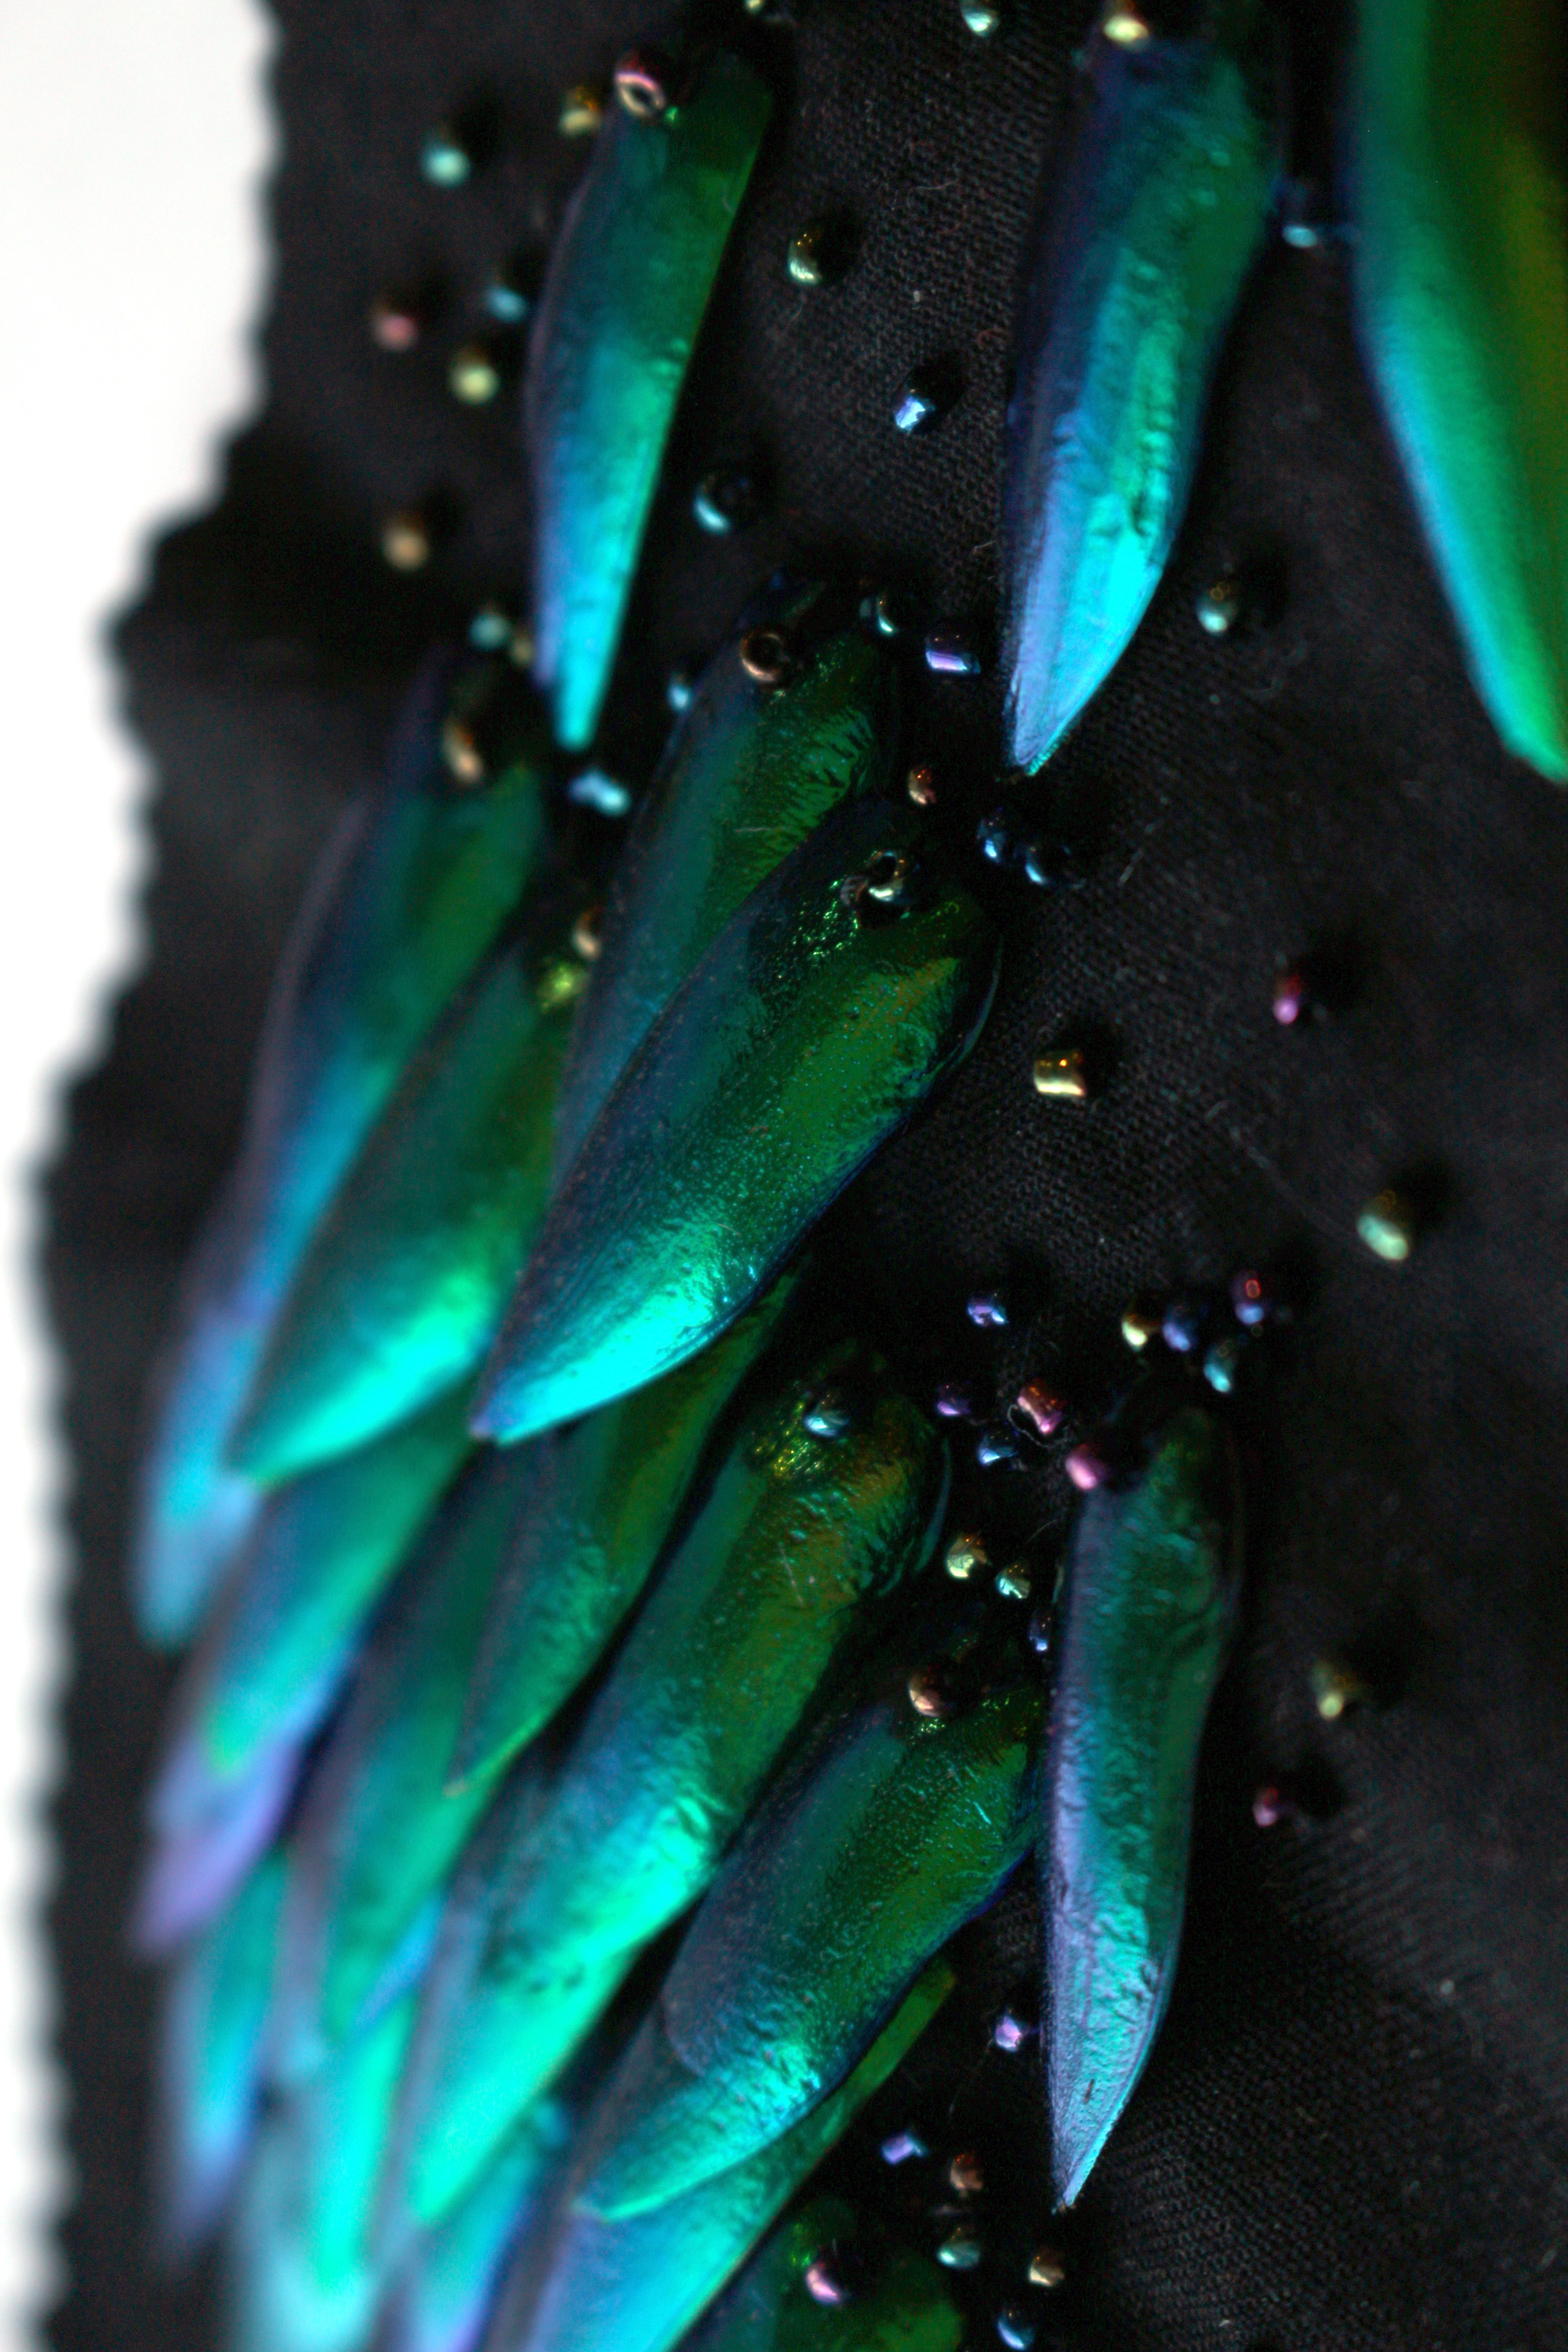 A photo of a material sample: a piece of black fabric onto which is embroidered several green, irridescent beetle wigns and glass beads.